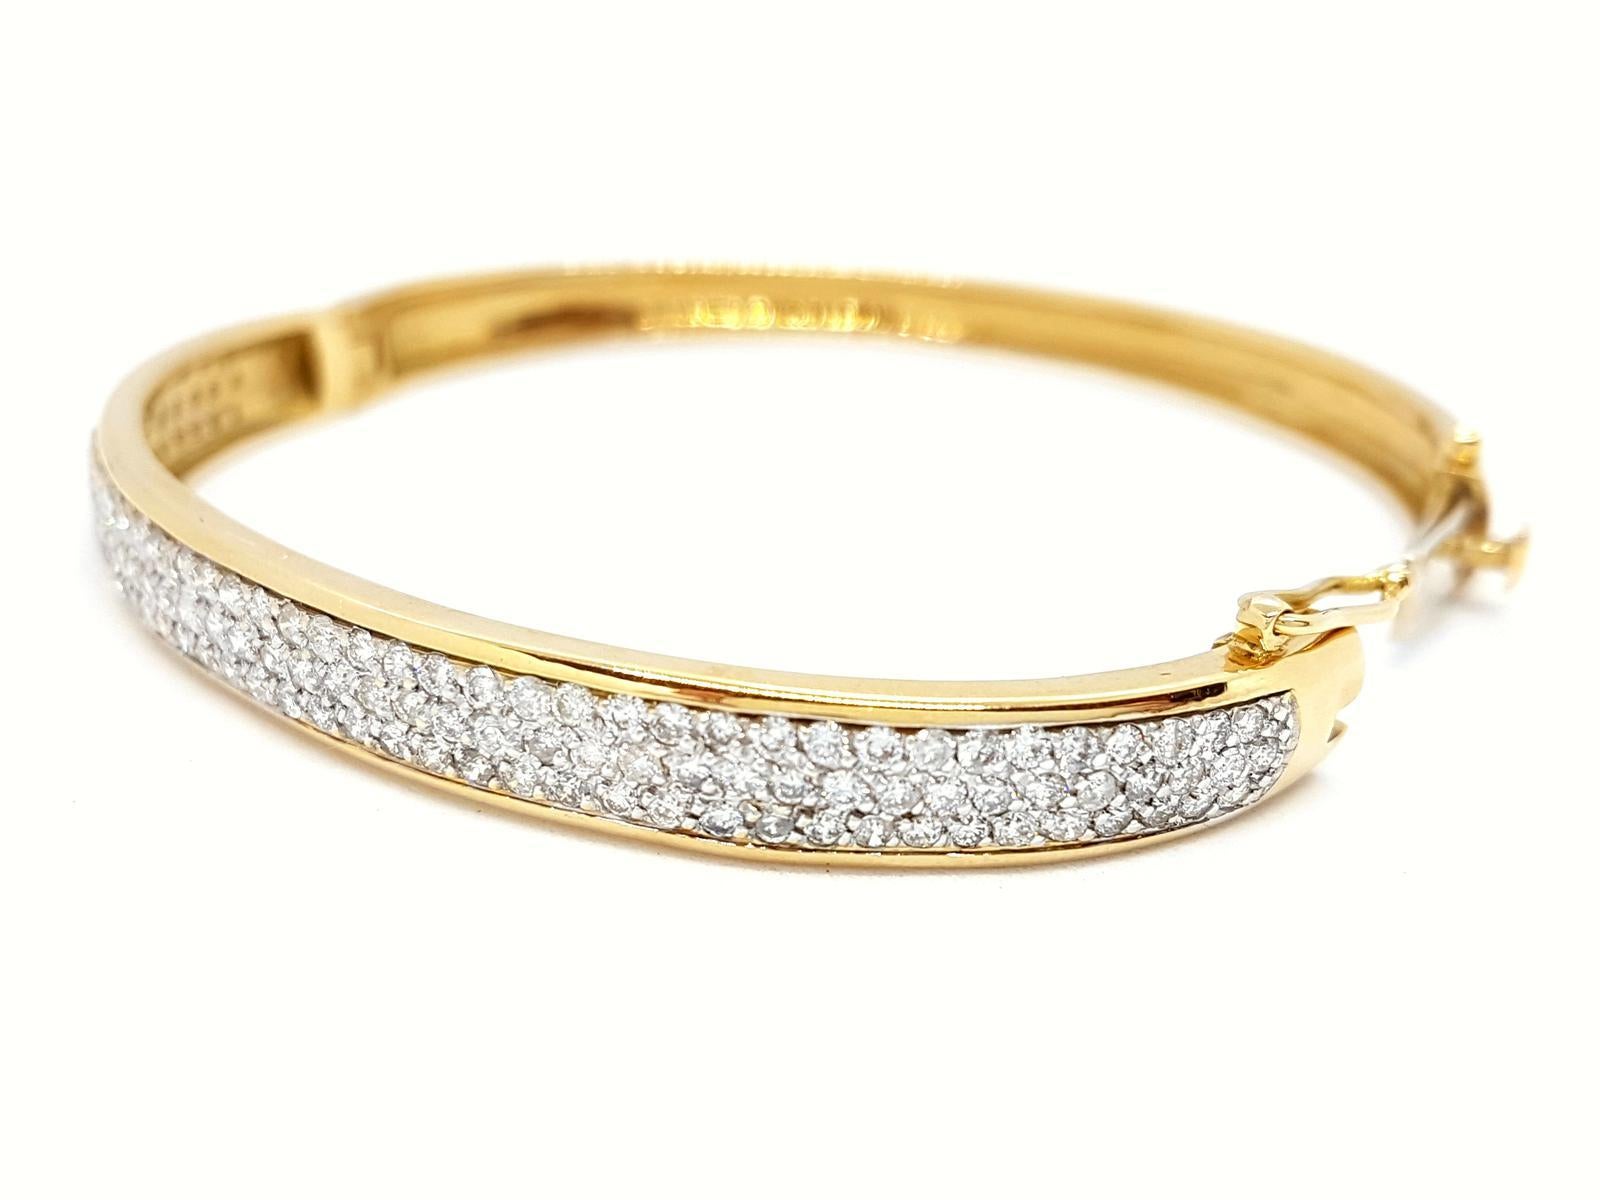 Beautiful bracelet Yellow gold 18K Bracelet opening. paver 133 brilliant cut diamonds. for about 1.33 ct total weight: 20.69 g. size: 19 cm. width: 0.7 cm. punched head eagle. excellent condition
